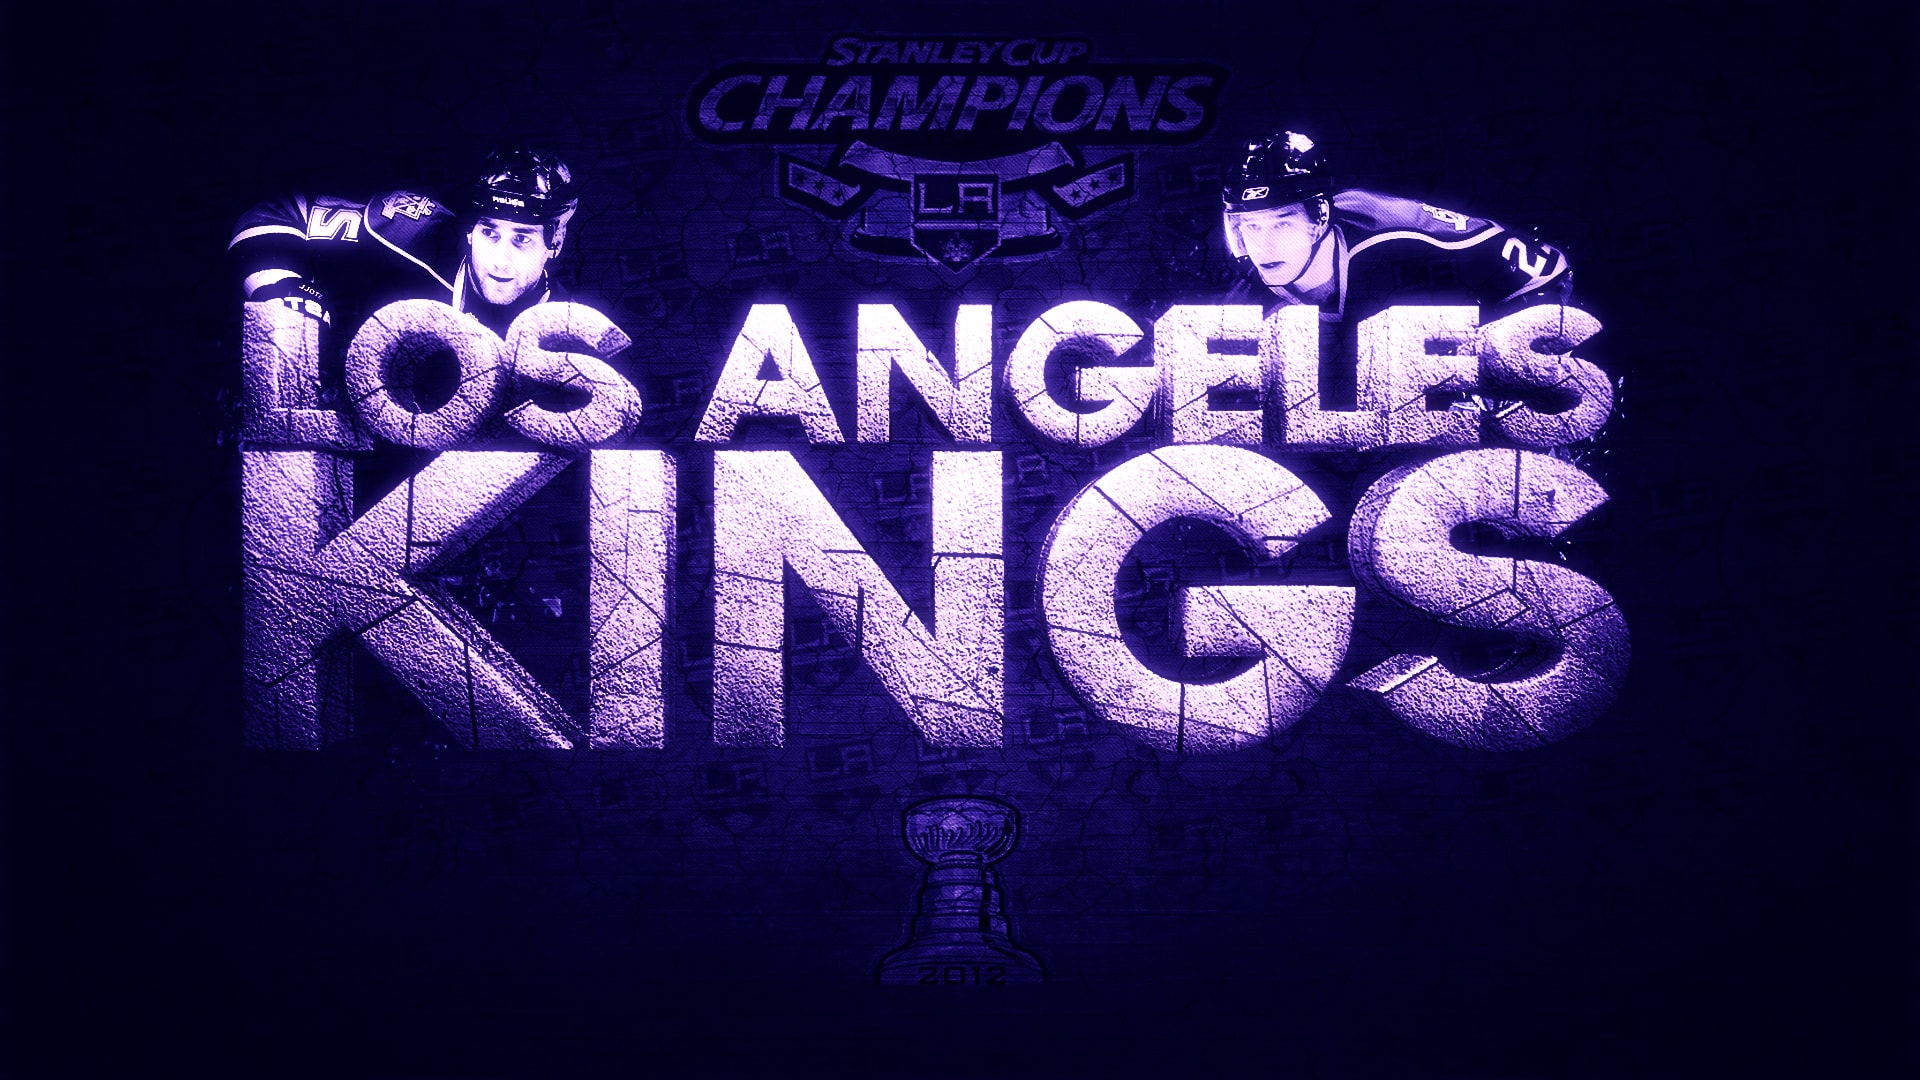 This one was made because Kings is simply my favourite NHL team. And because they won the Stanley Cup in 2012 I wanted to make a background for the fans.